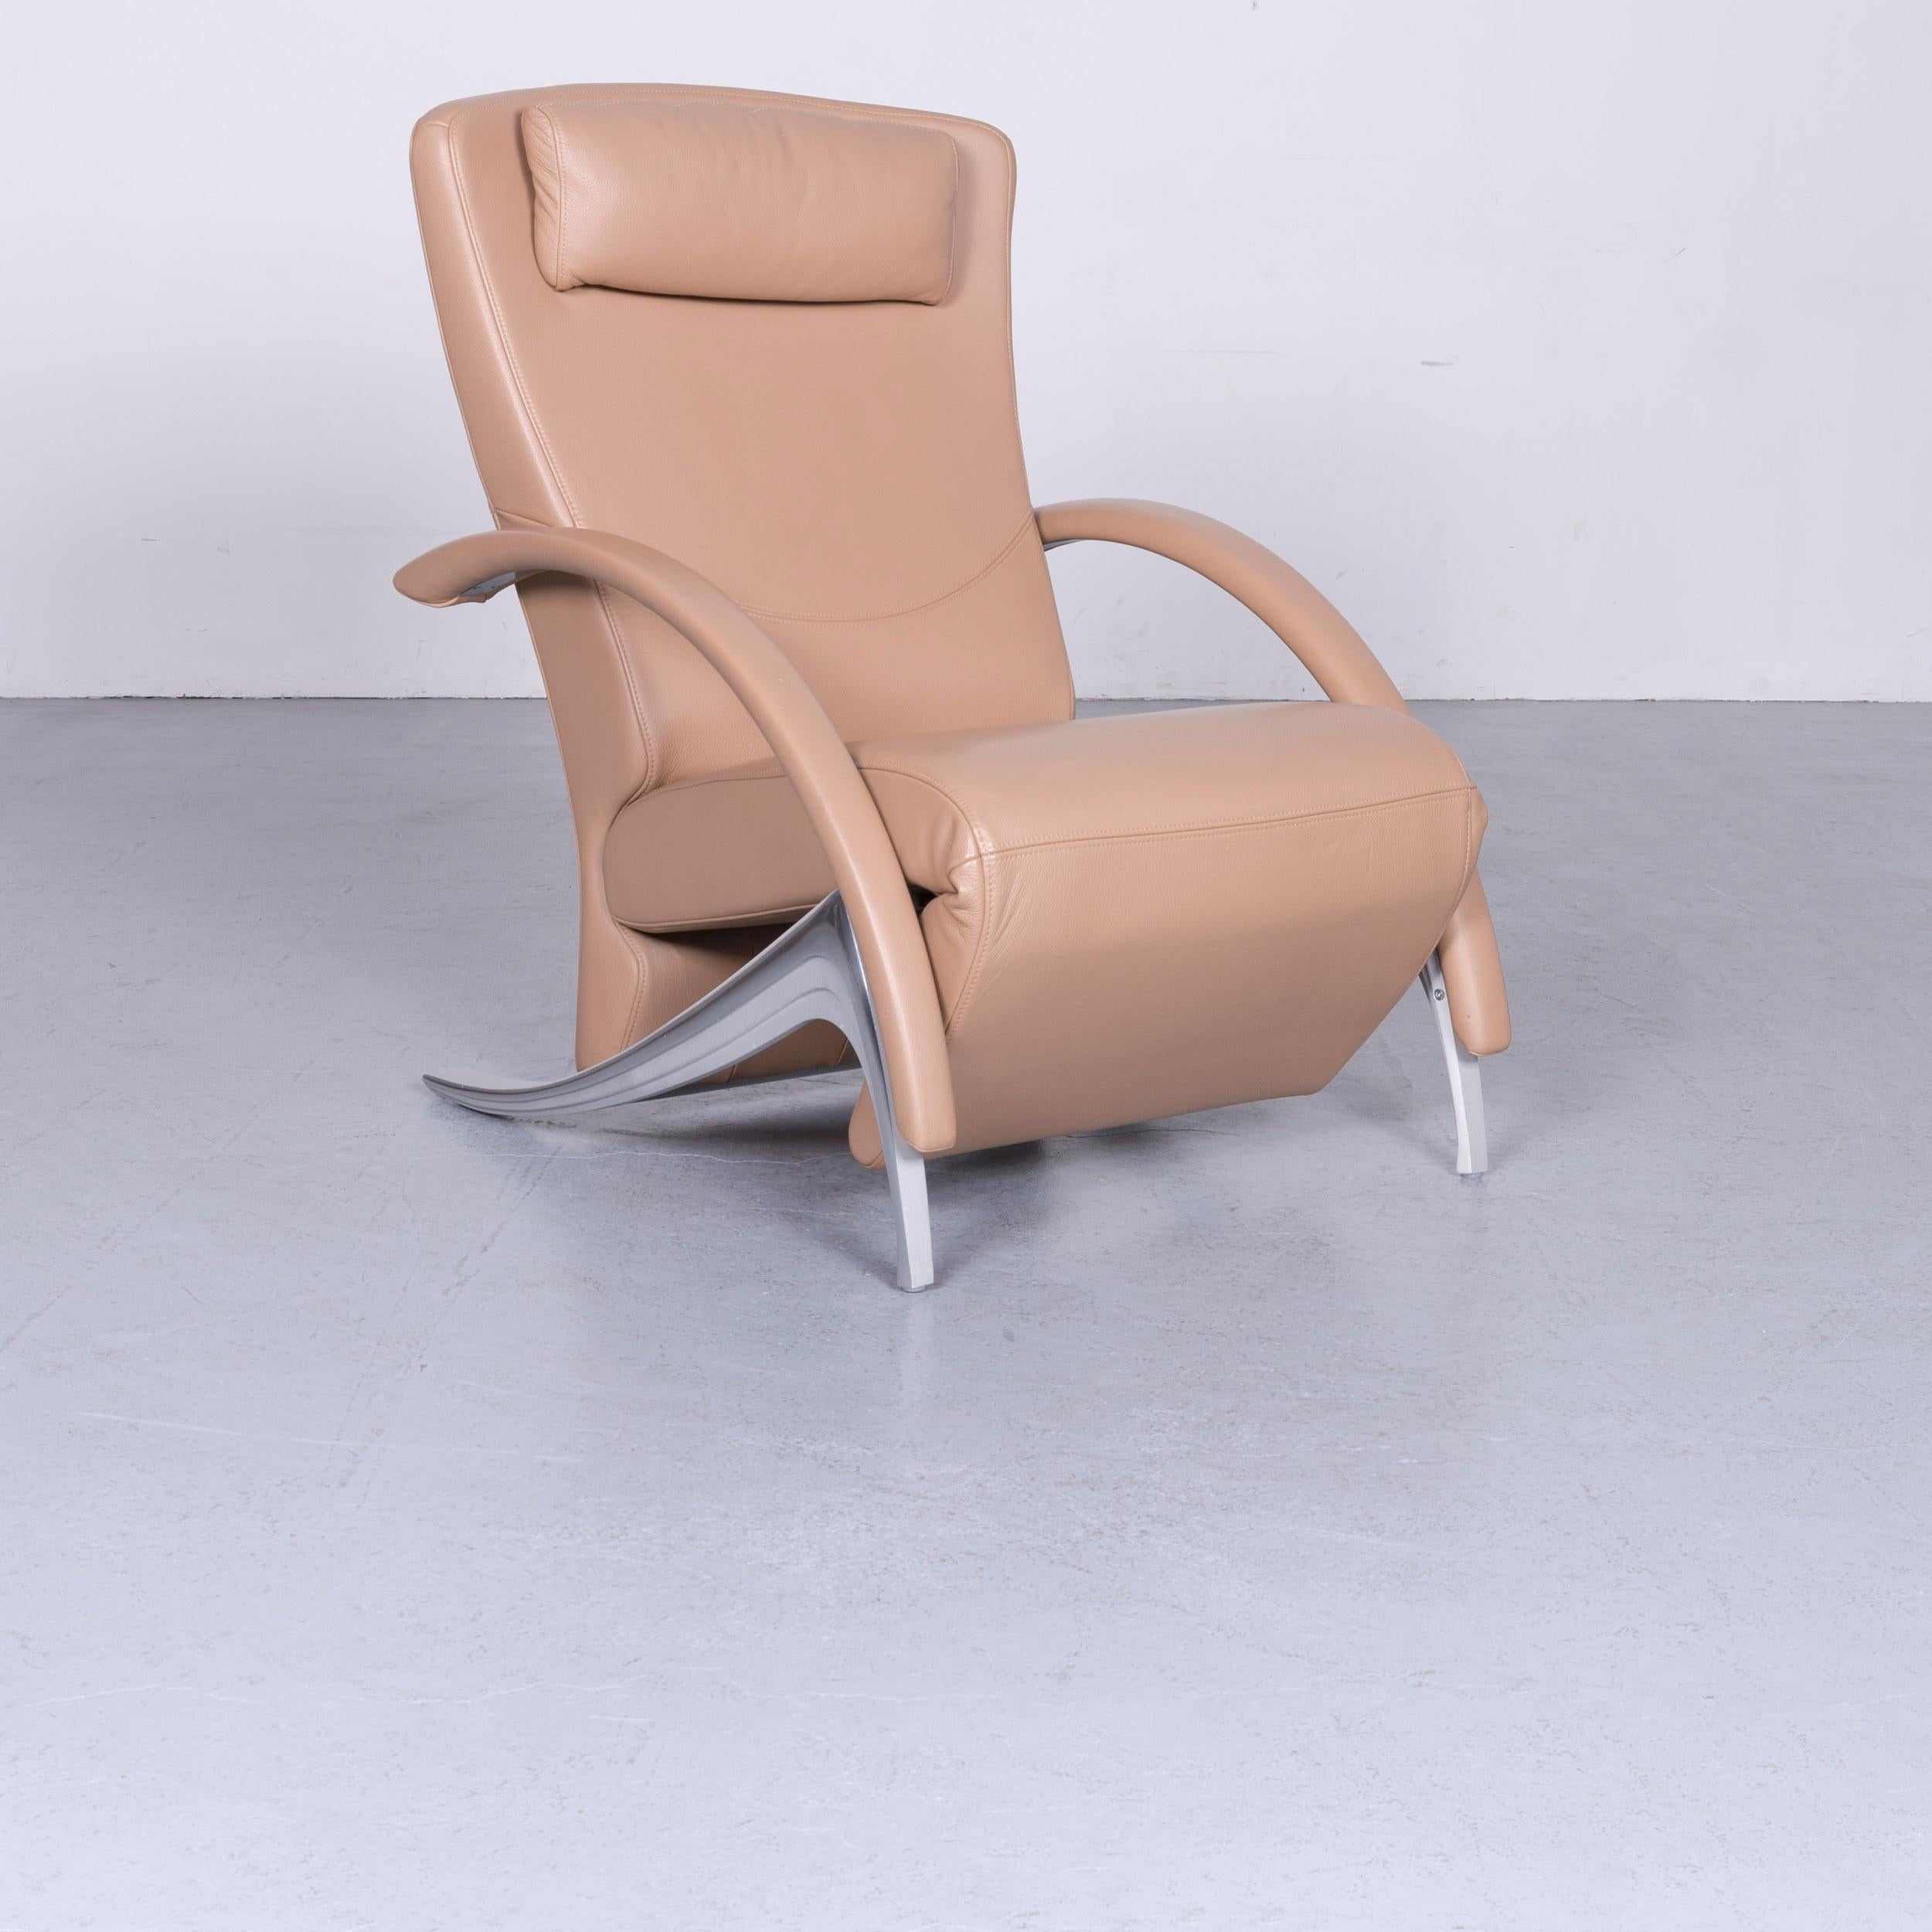 We bring to you a Rolf Benz 3100 designer leather armchair beige chair with function.